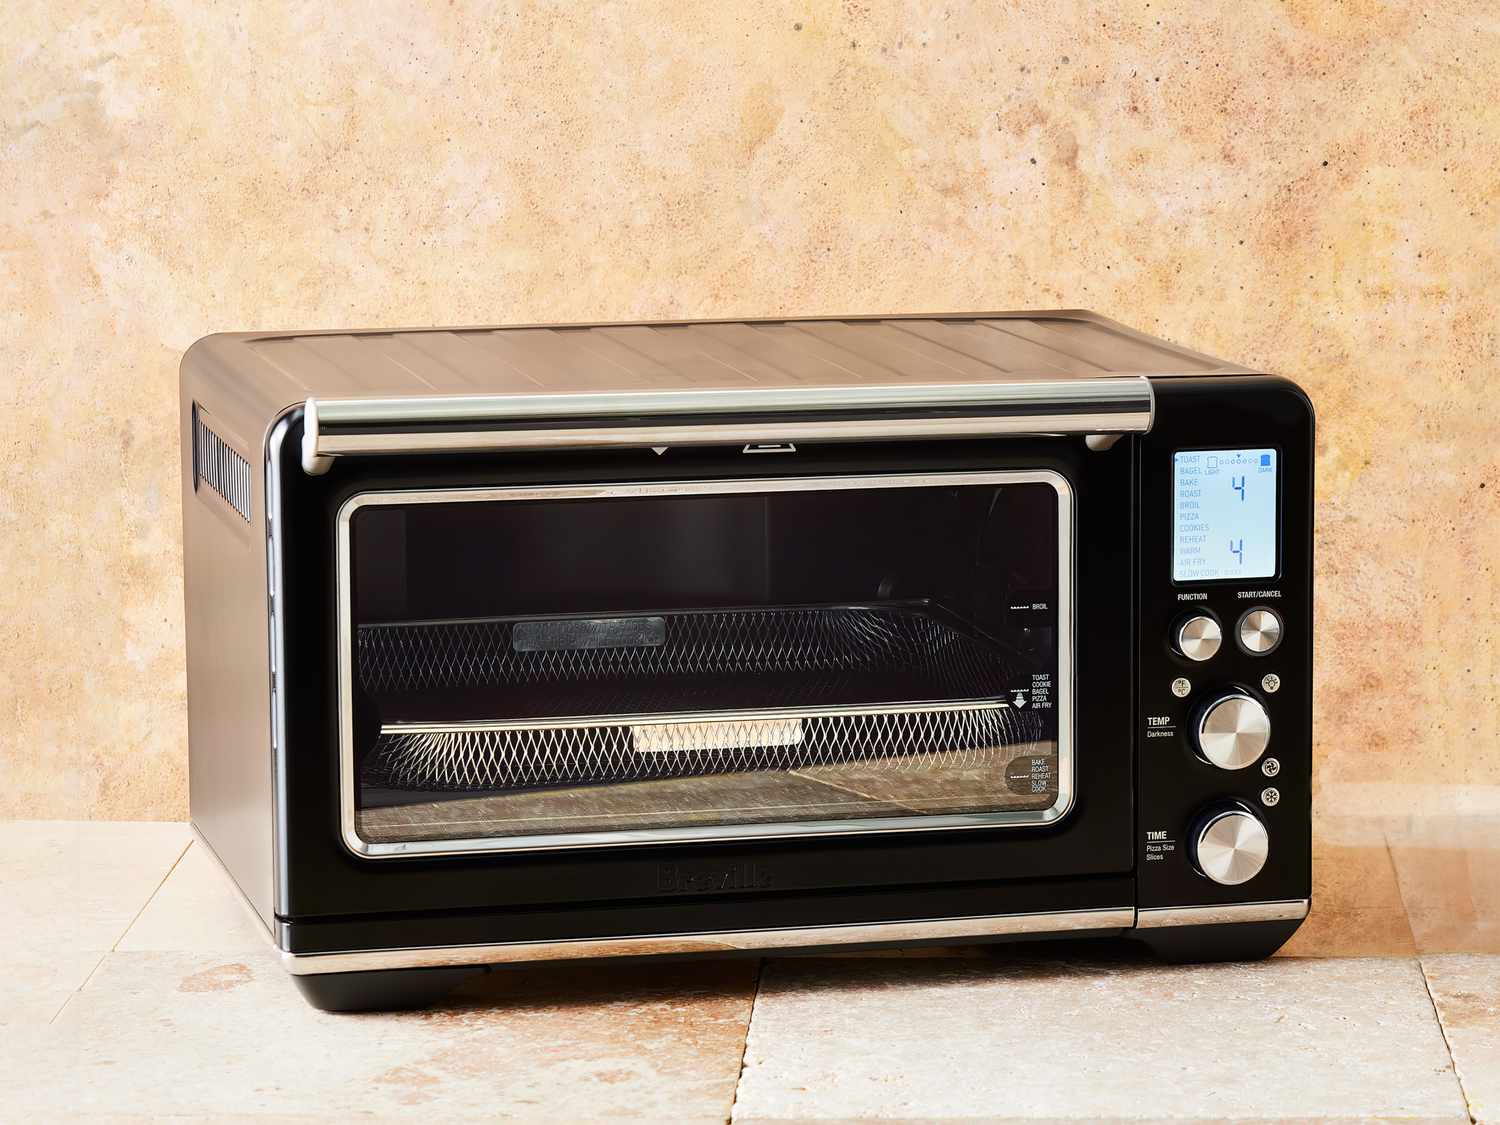 breville oven on terracotta tiles with tan backdrop